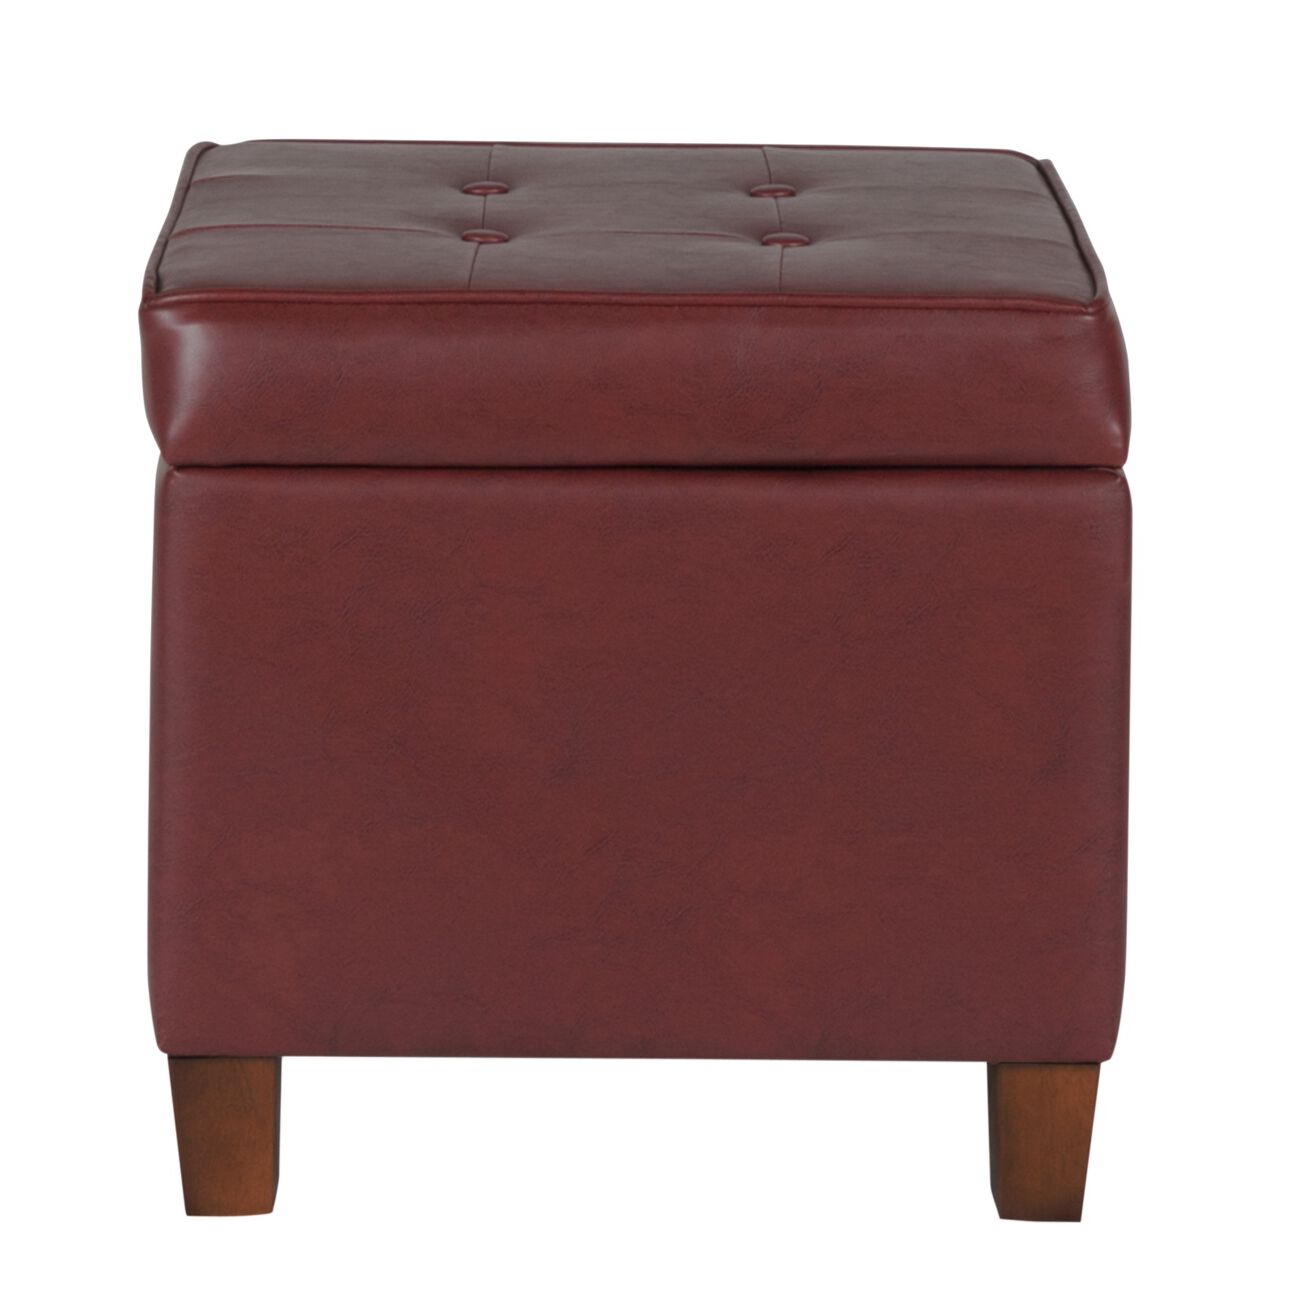 Square Shape Leatherette Upholstered Wooden Ottoman with Tufted Lift Off Lid Storage, Red